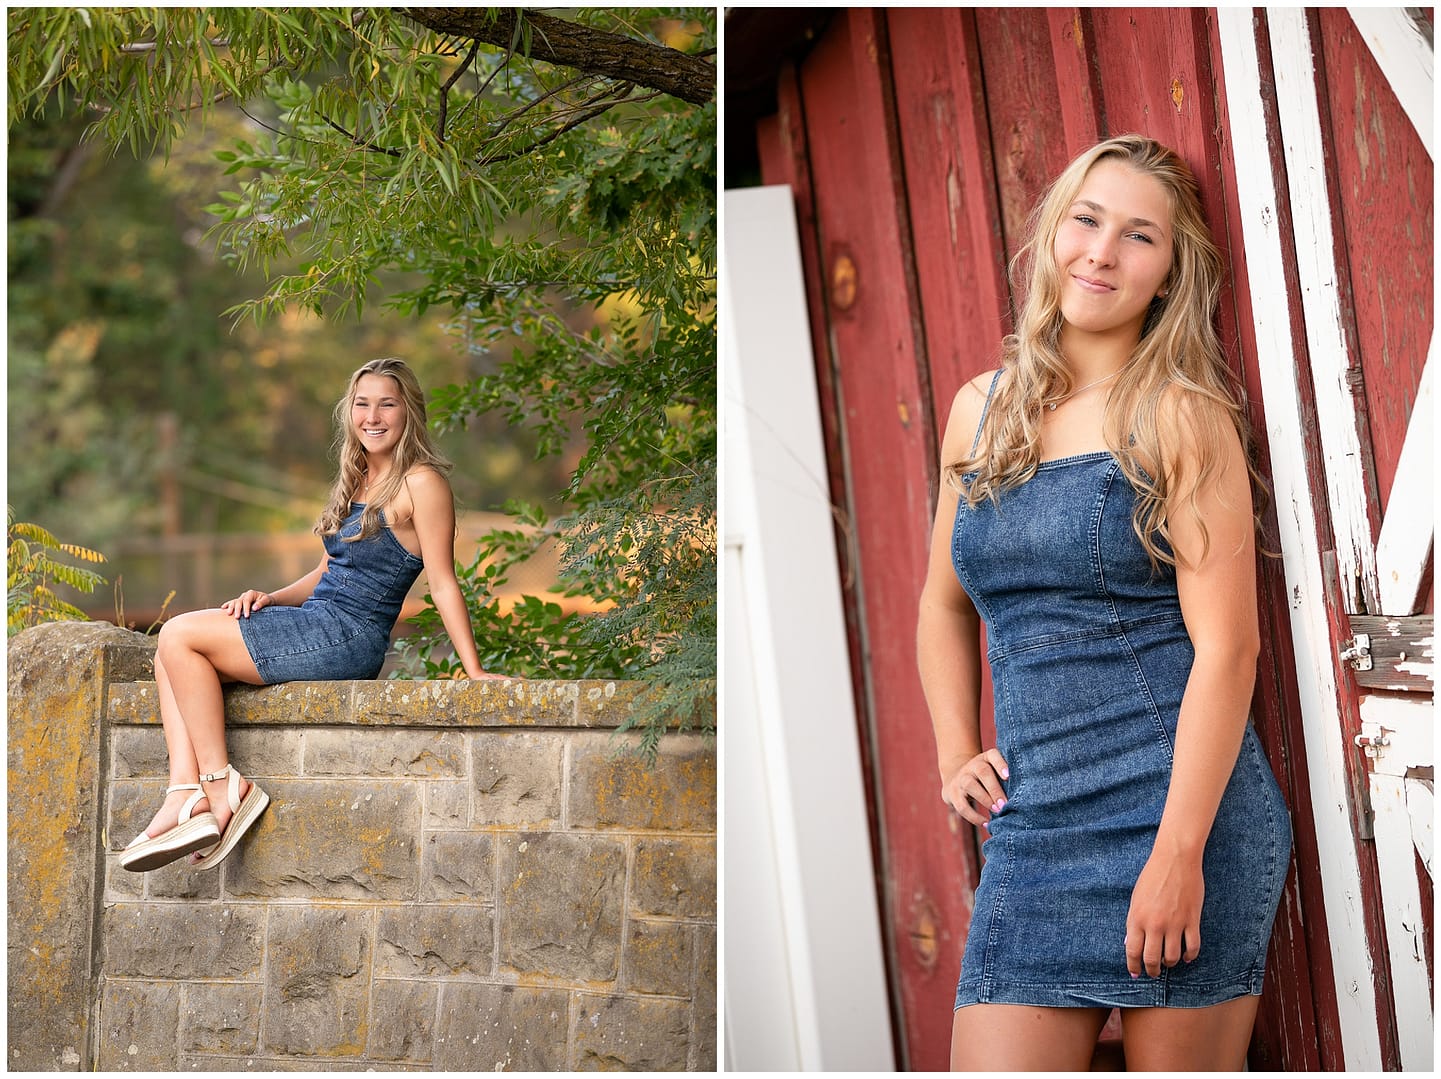 Young girl in denim dress poses for photograph. Photo by Tiffany Hix Photography.